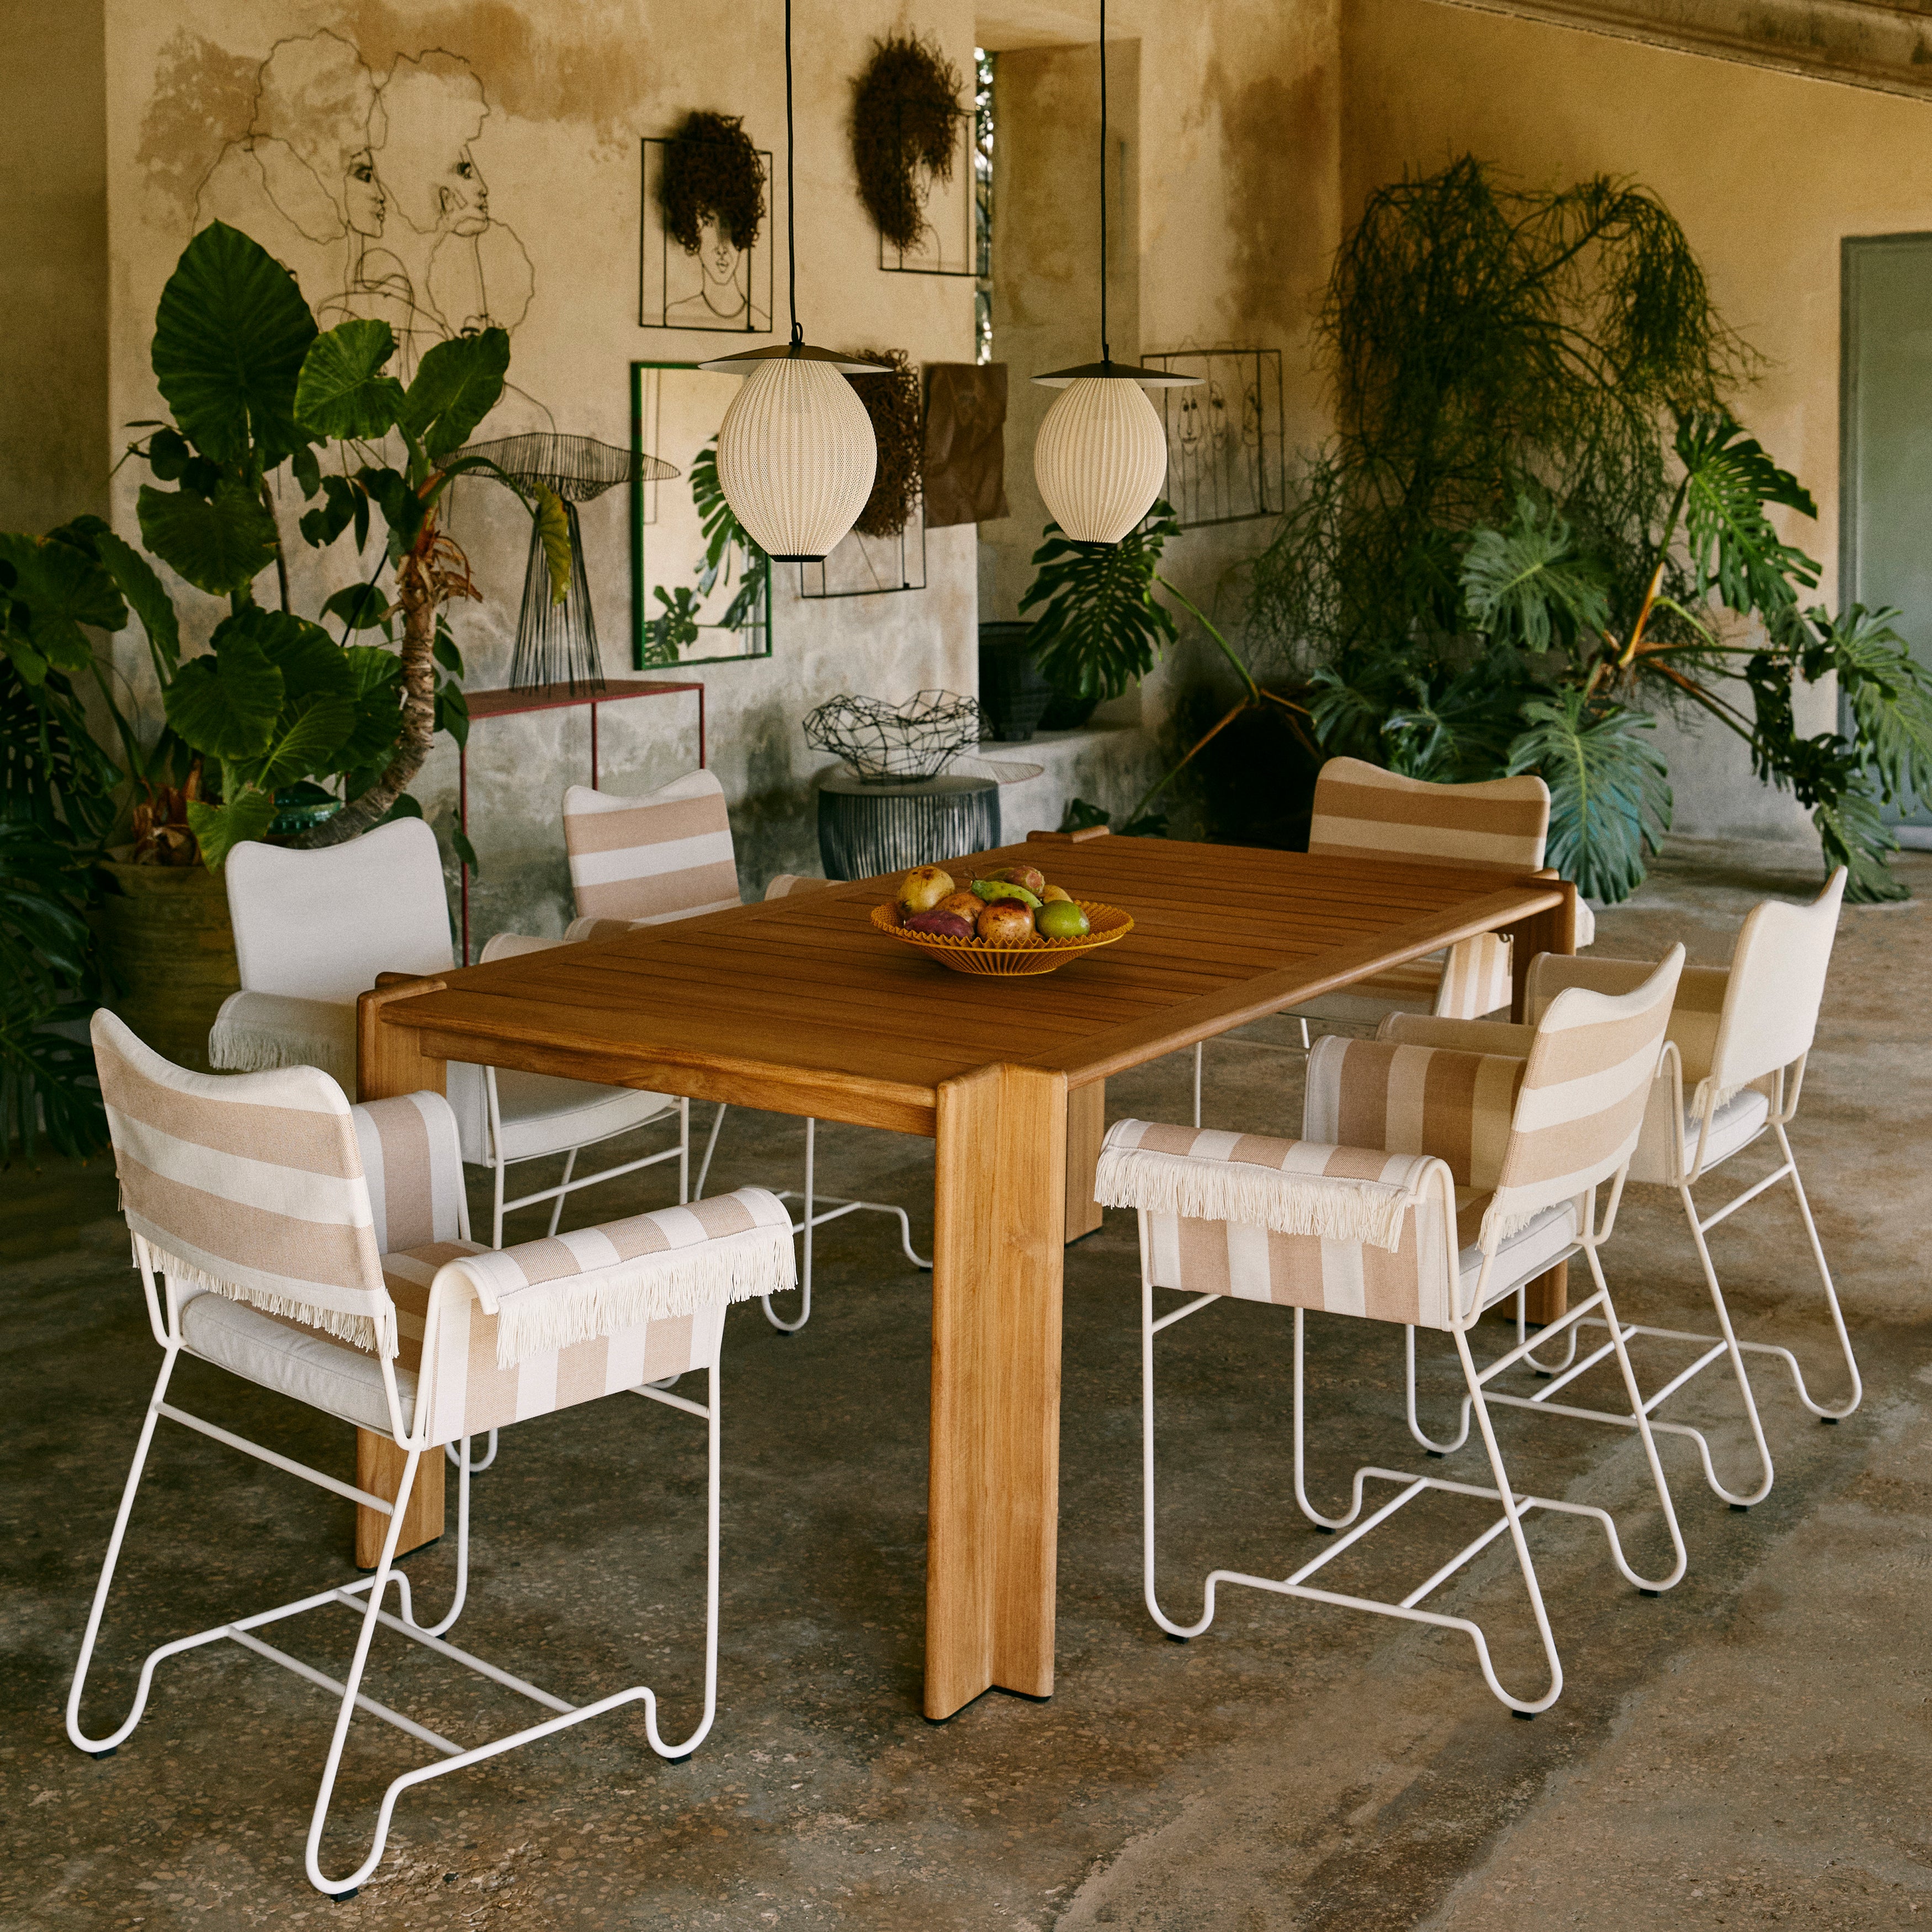 Atmosfera Dining Table: Outdoor